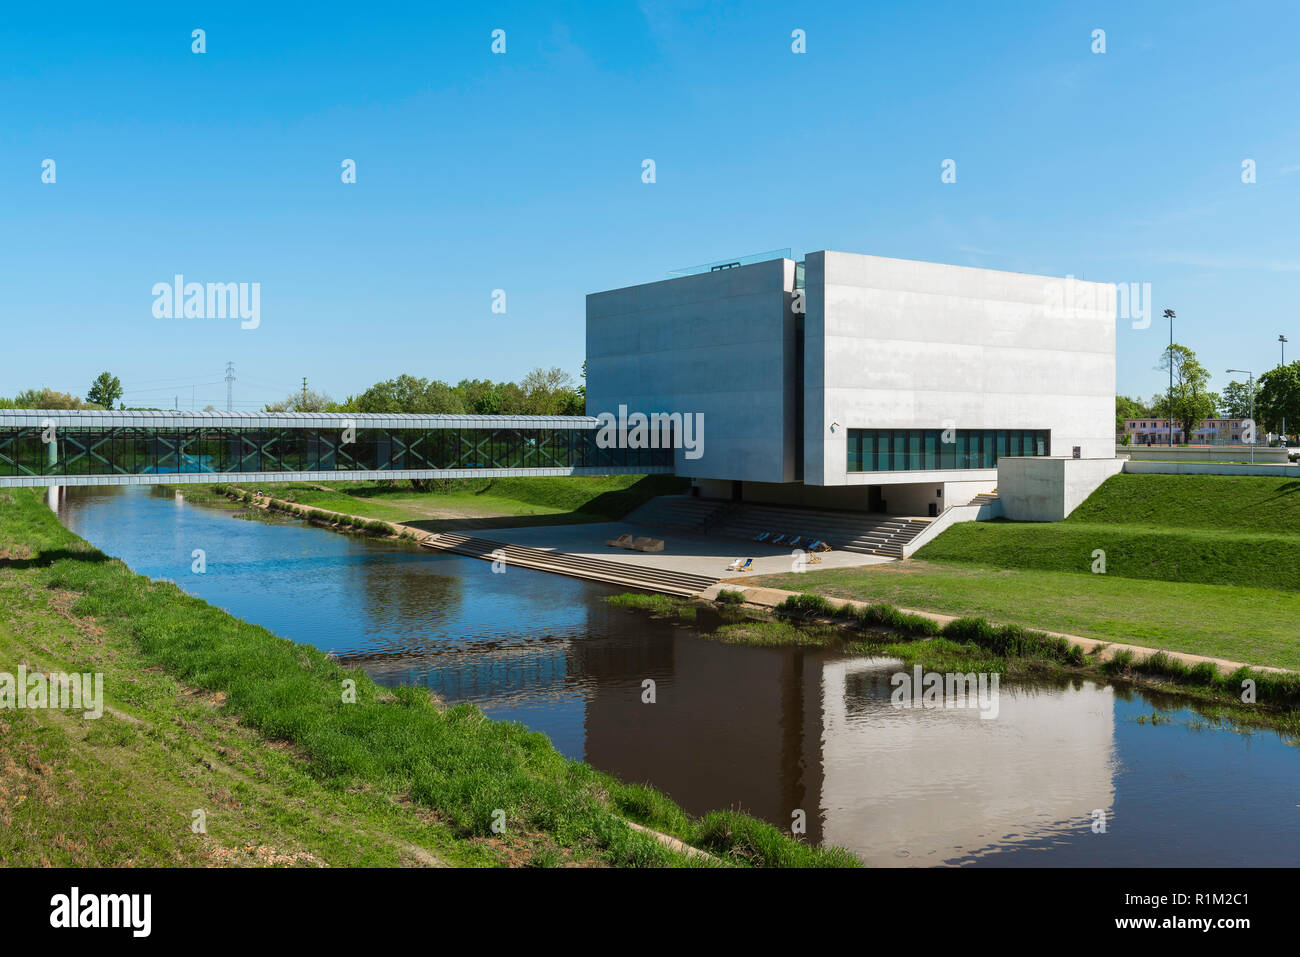 Posnania Poznan High Resolution Stock Photography and Images - Alamy